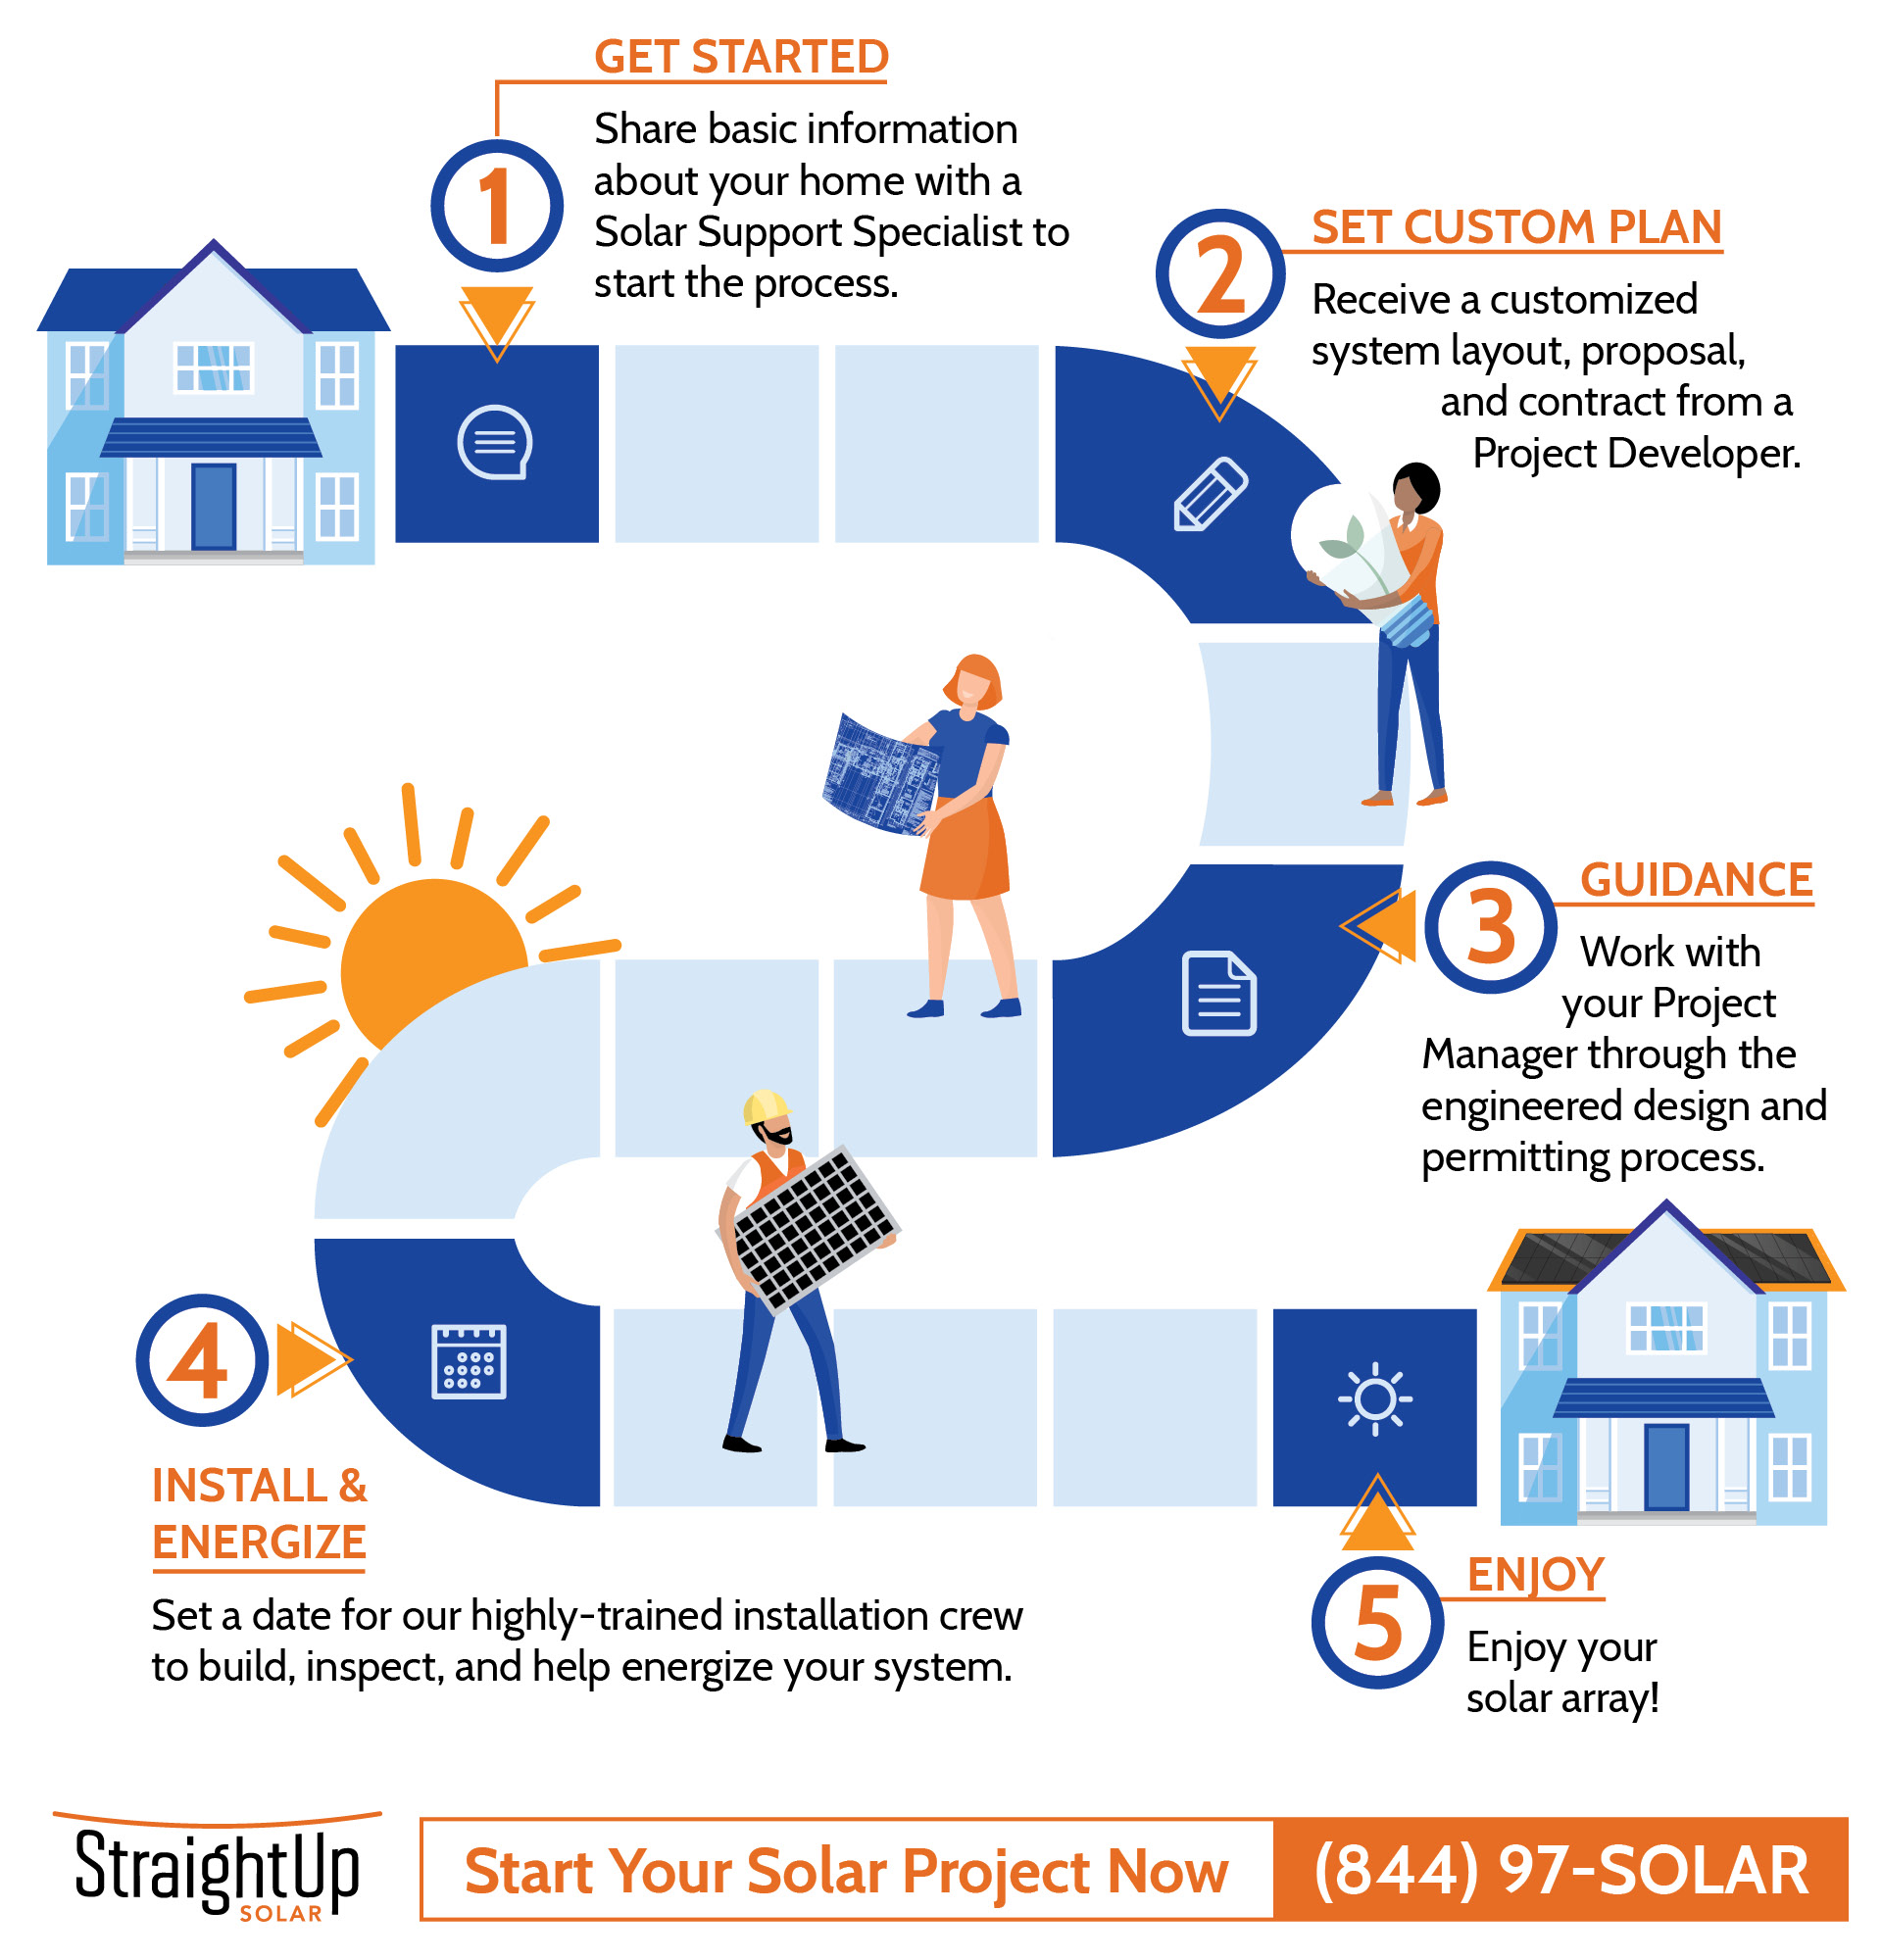 5 Steps to Make Your House a Solar Power Home